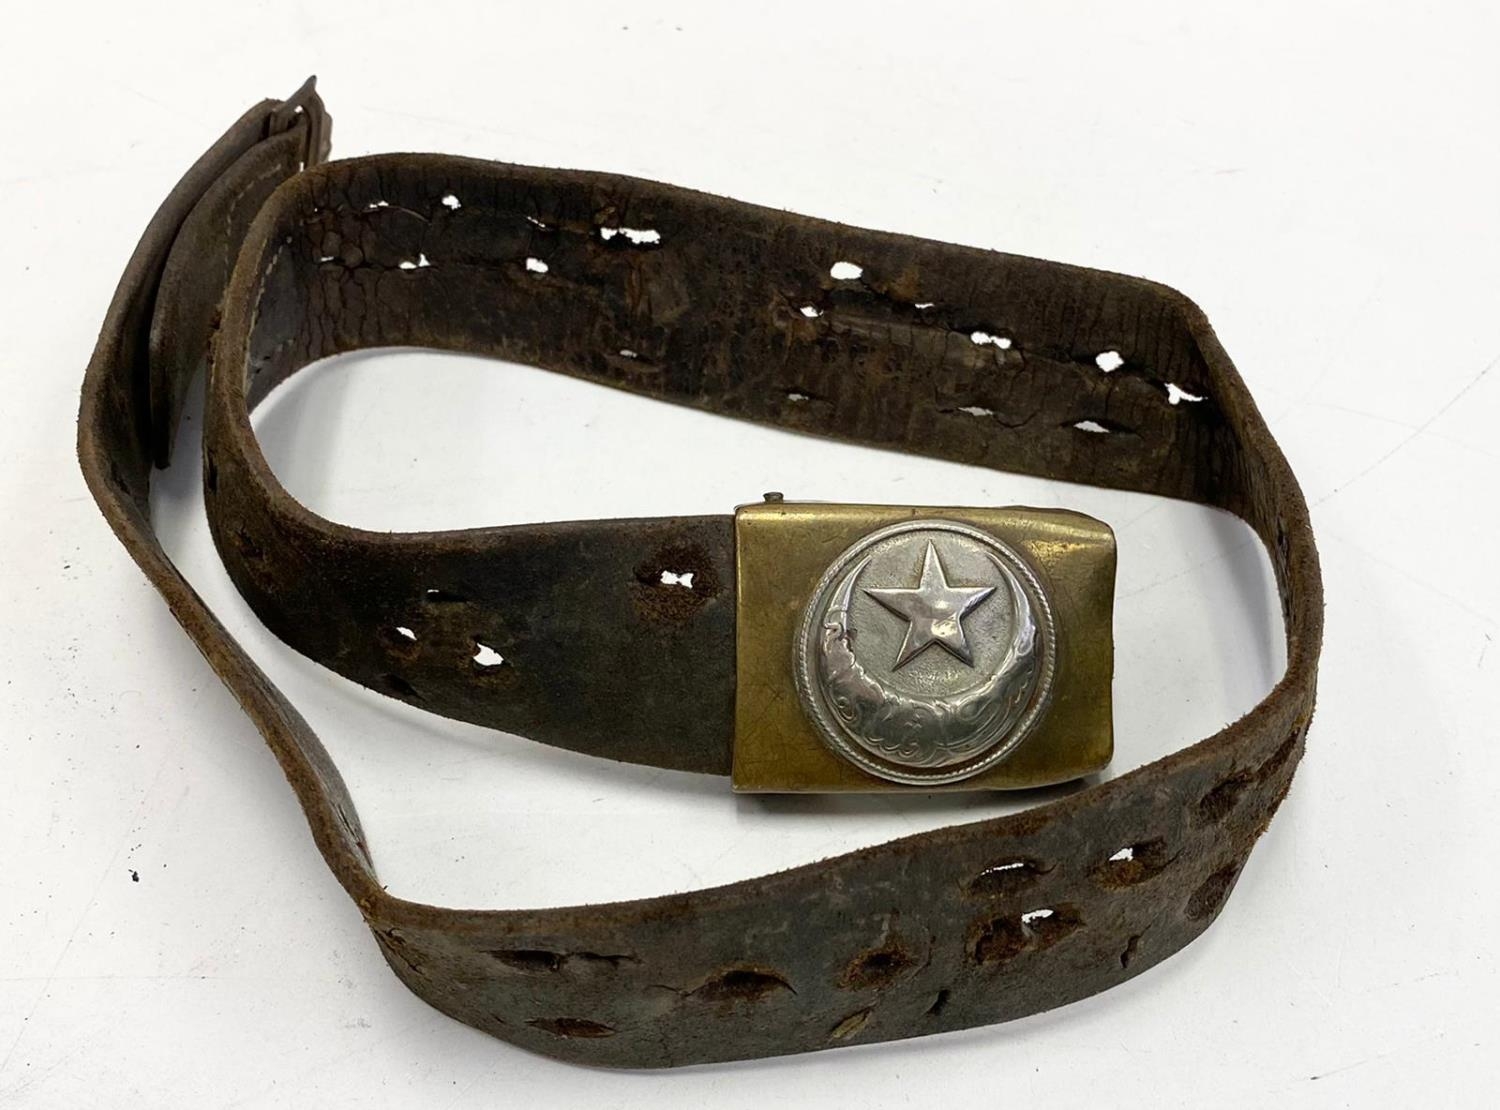 WW1 Ottoman Empire-Turkish Belt and Buckle. This was once a ?Hate? belt that would have been adorned